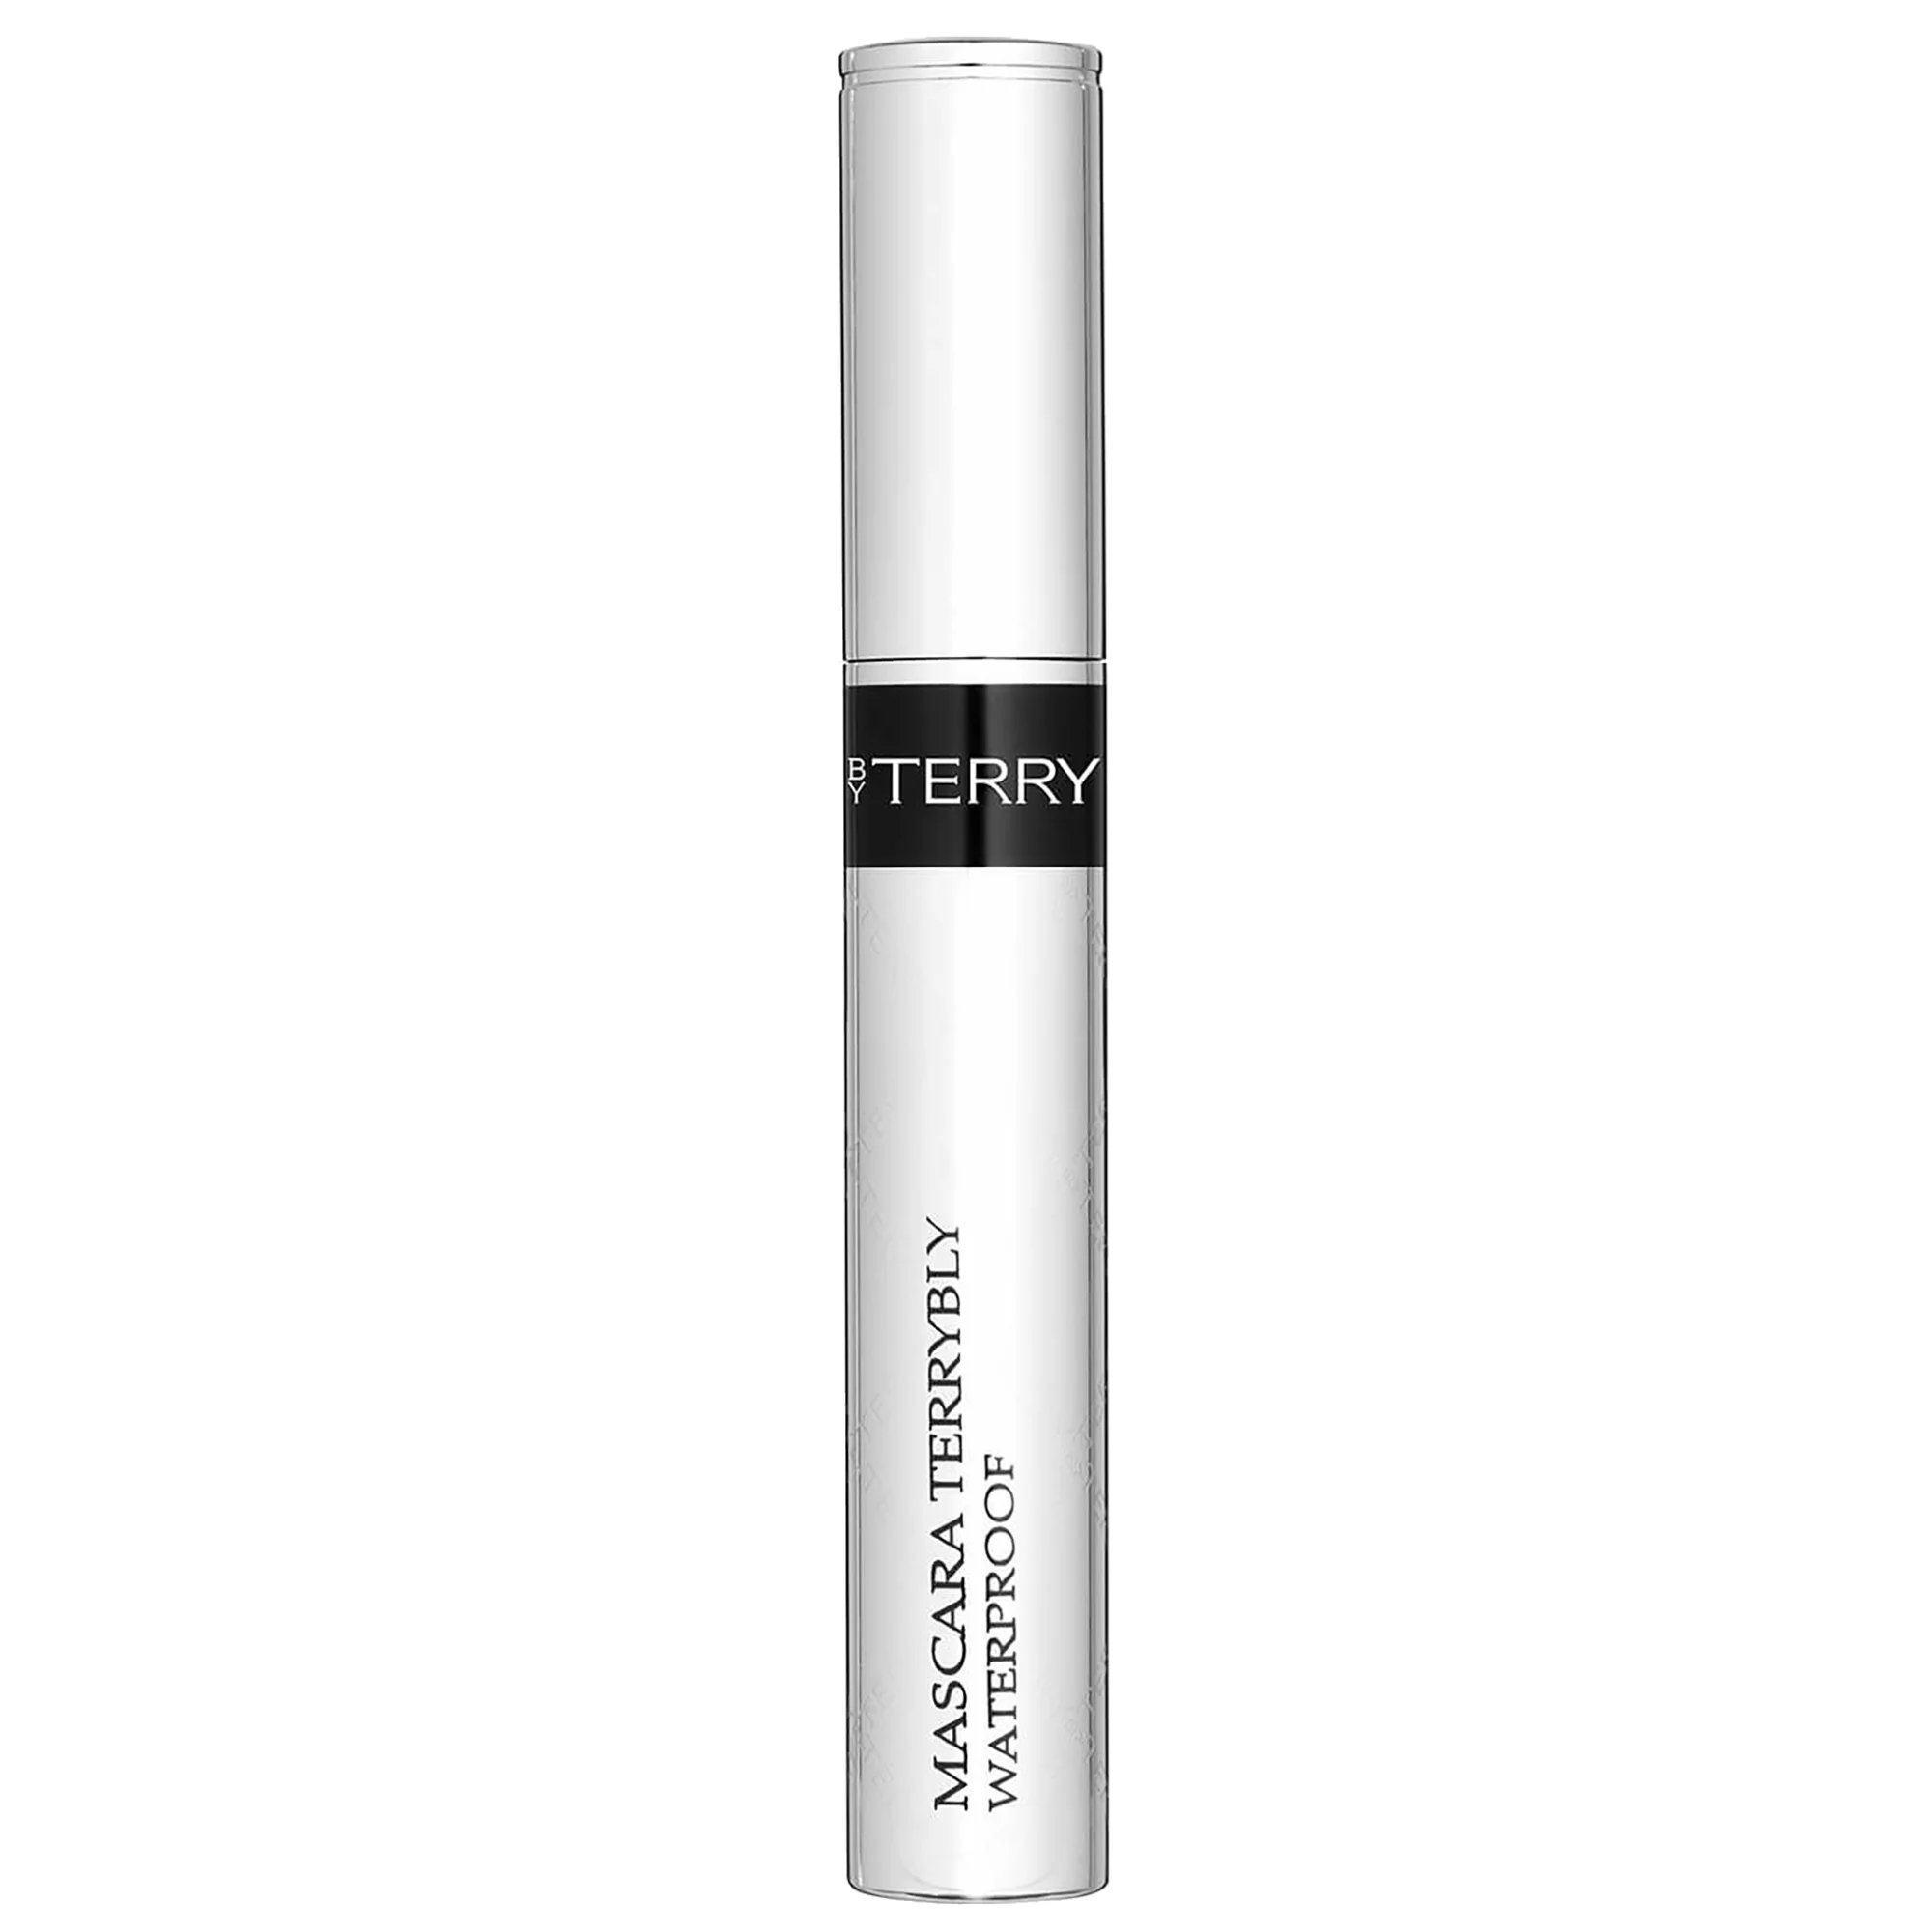 By Terry Terrybly Waterproof Mascara - Black 8g Image 1